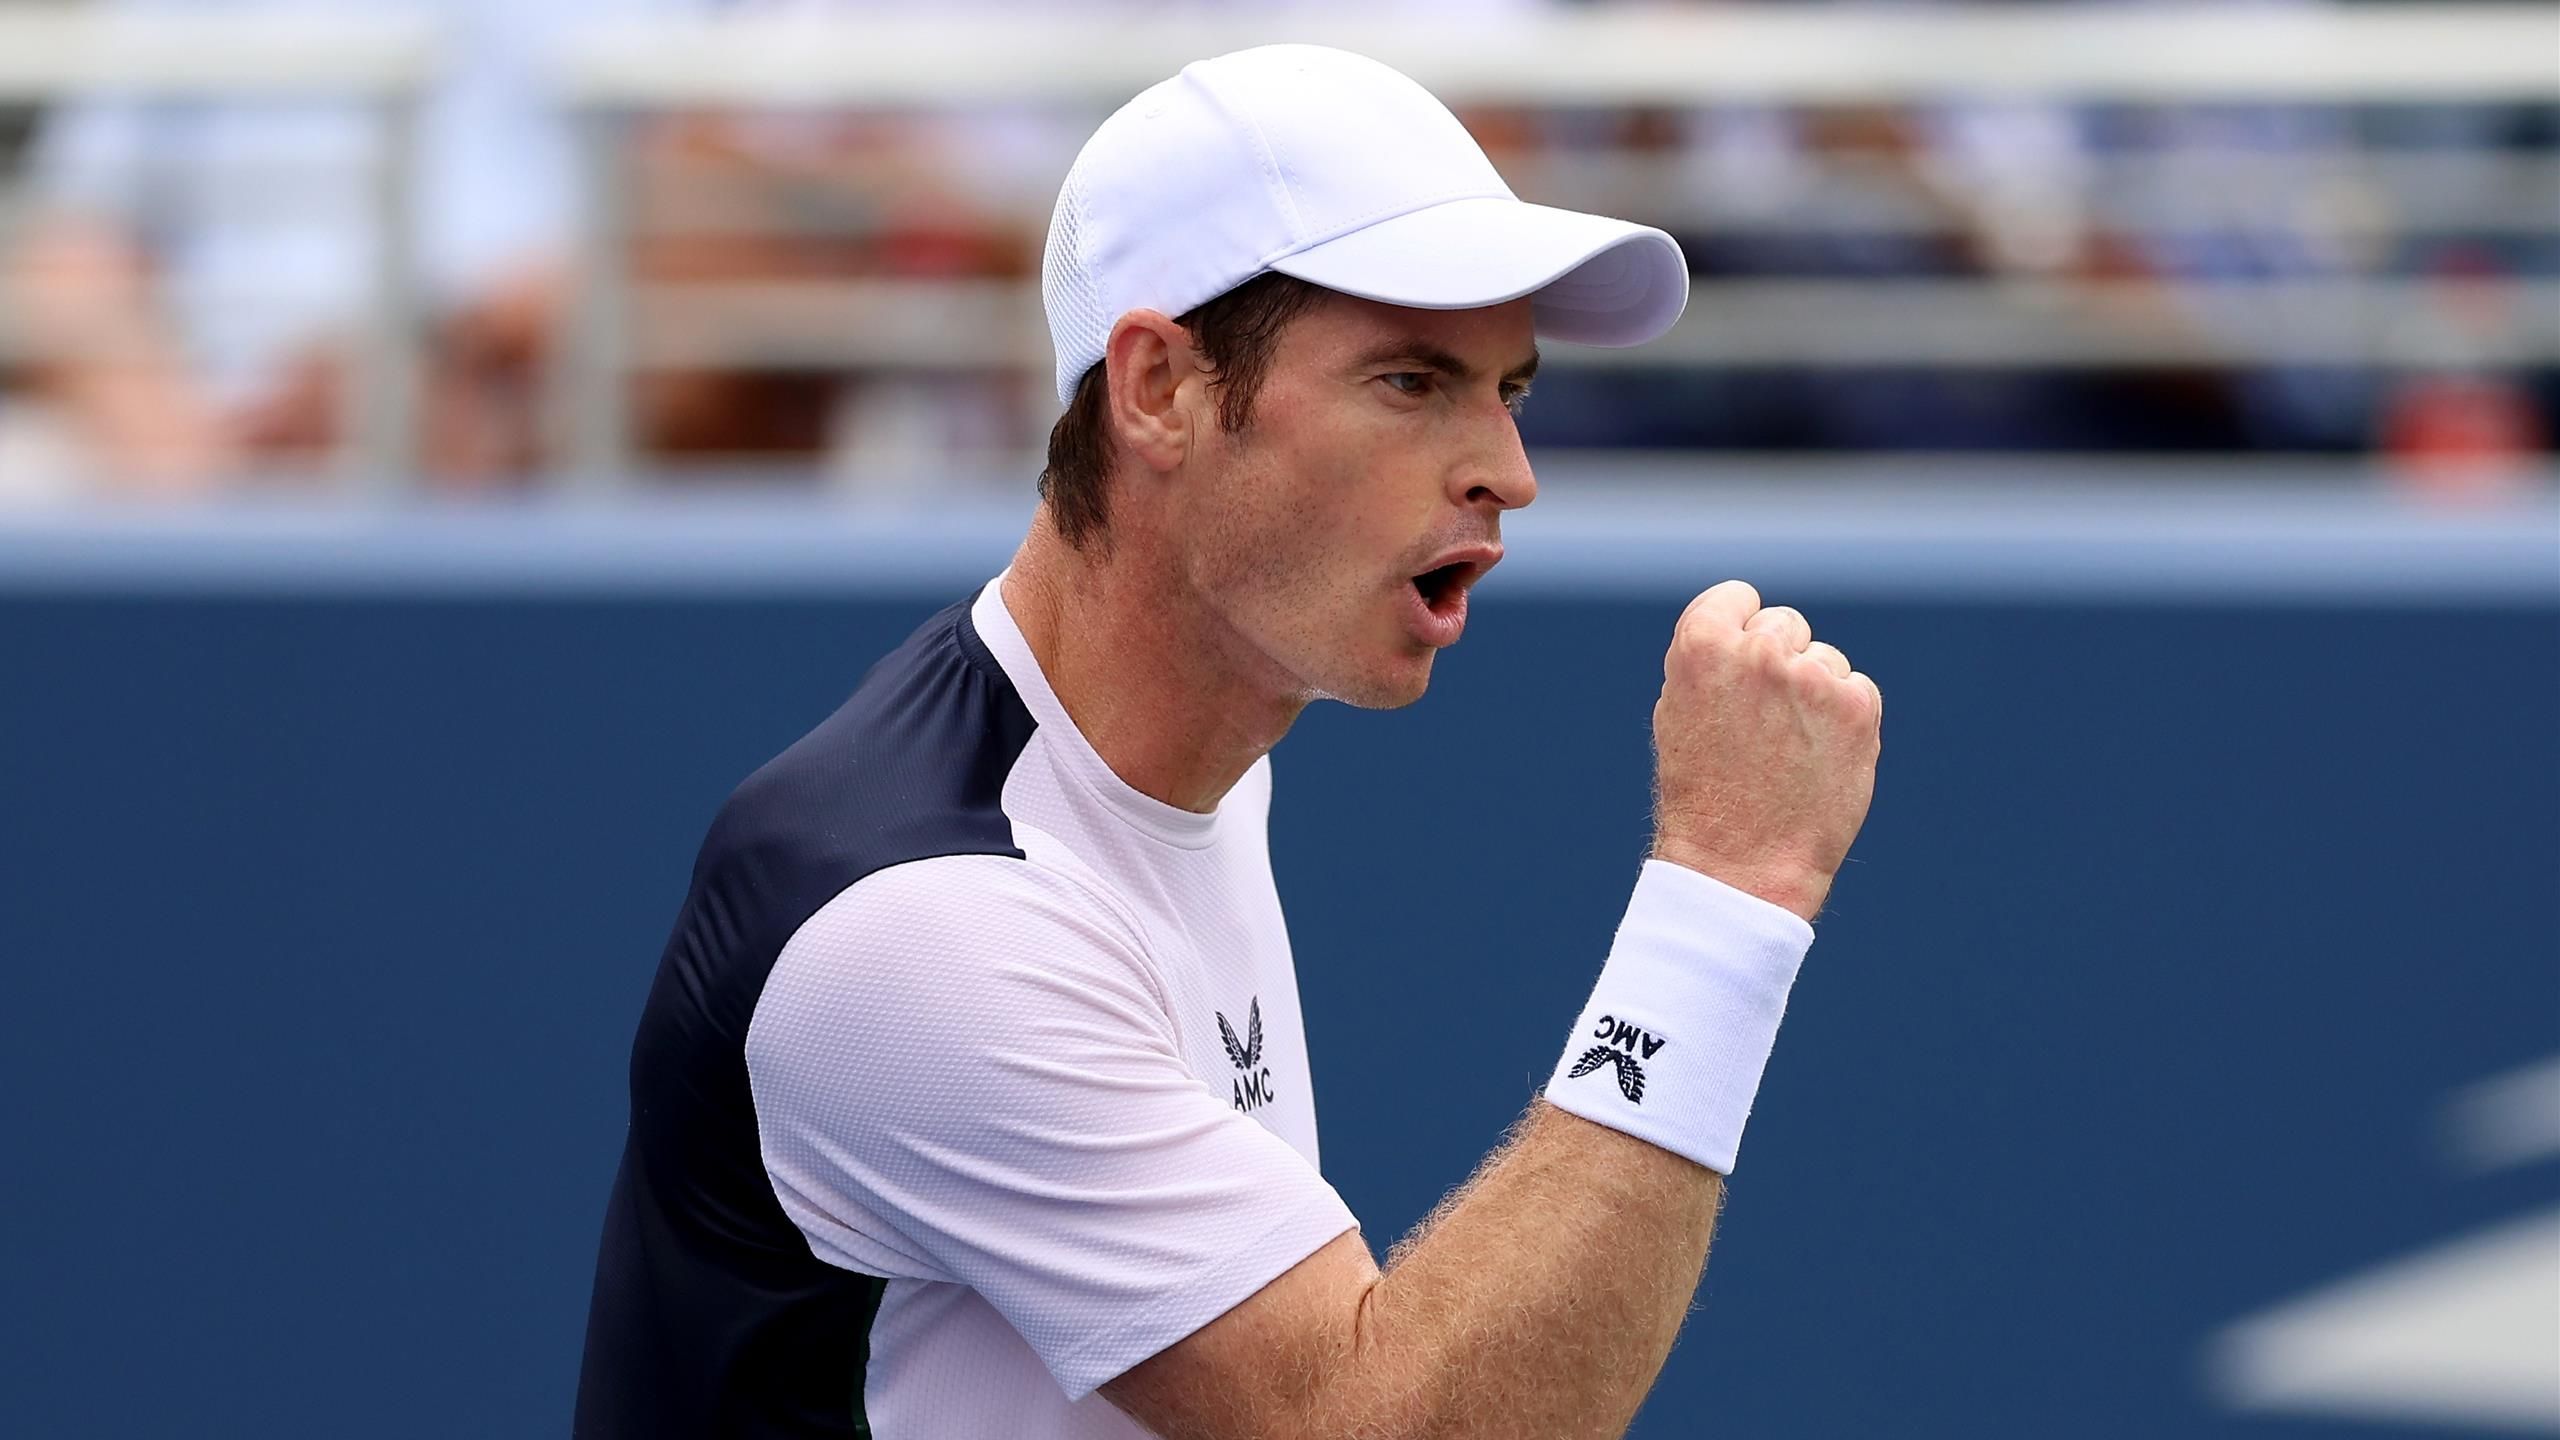 Andy Murray revels in amazing straight-sets win over Corentin Moutet at the US Open to reach round two in New York